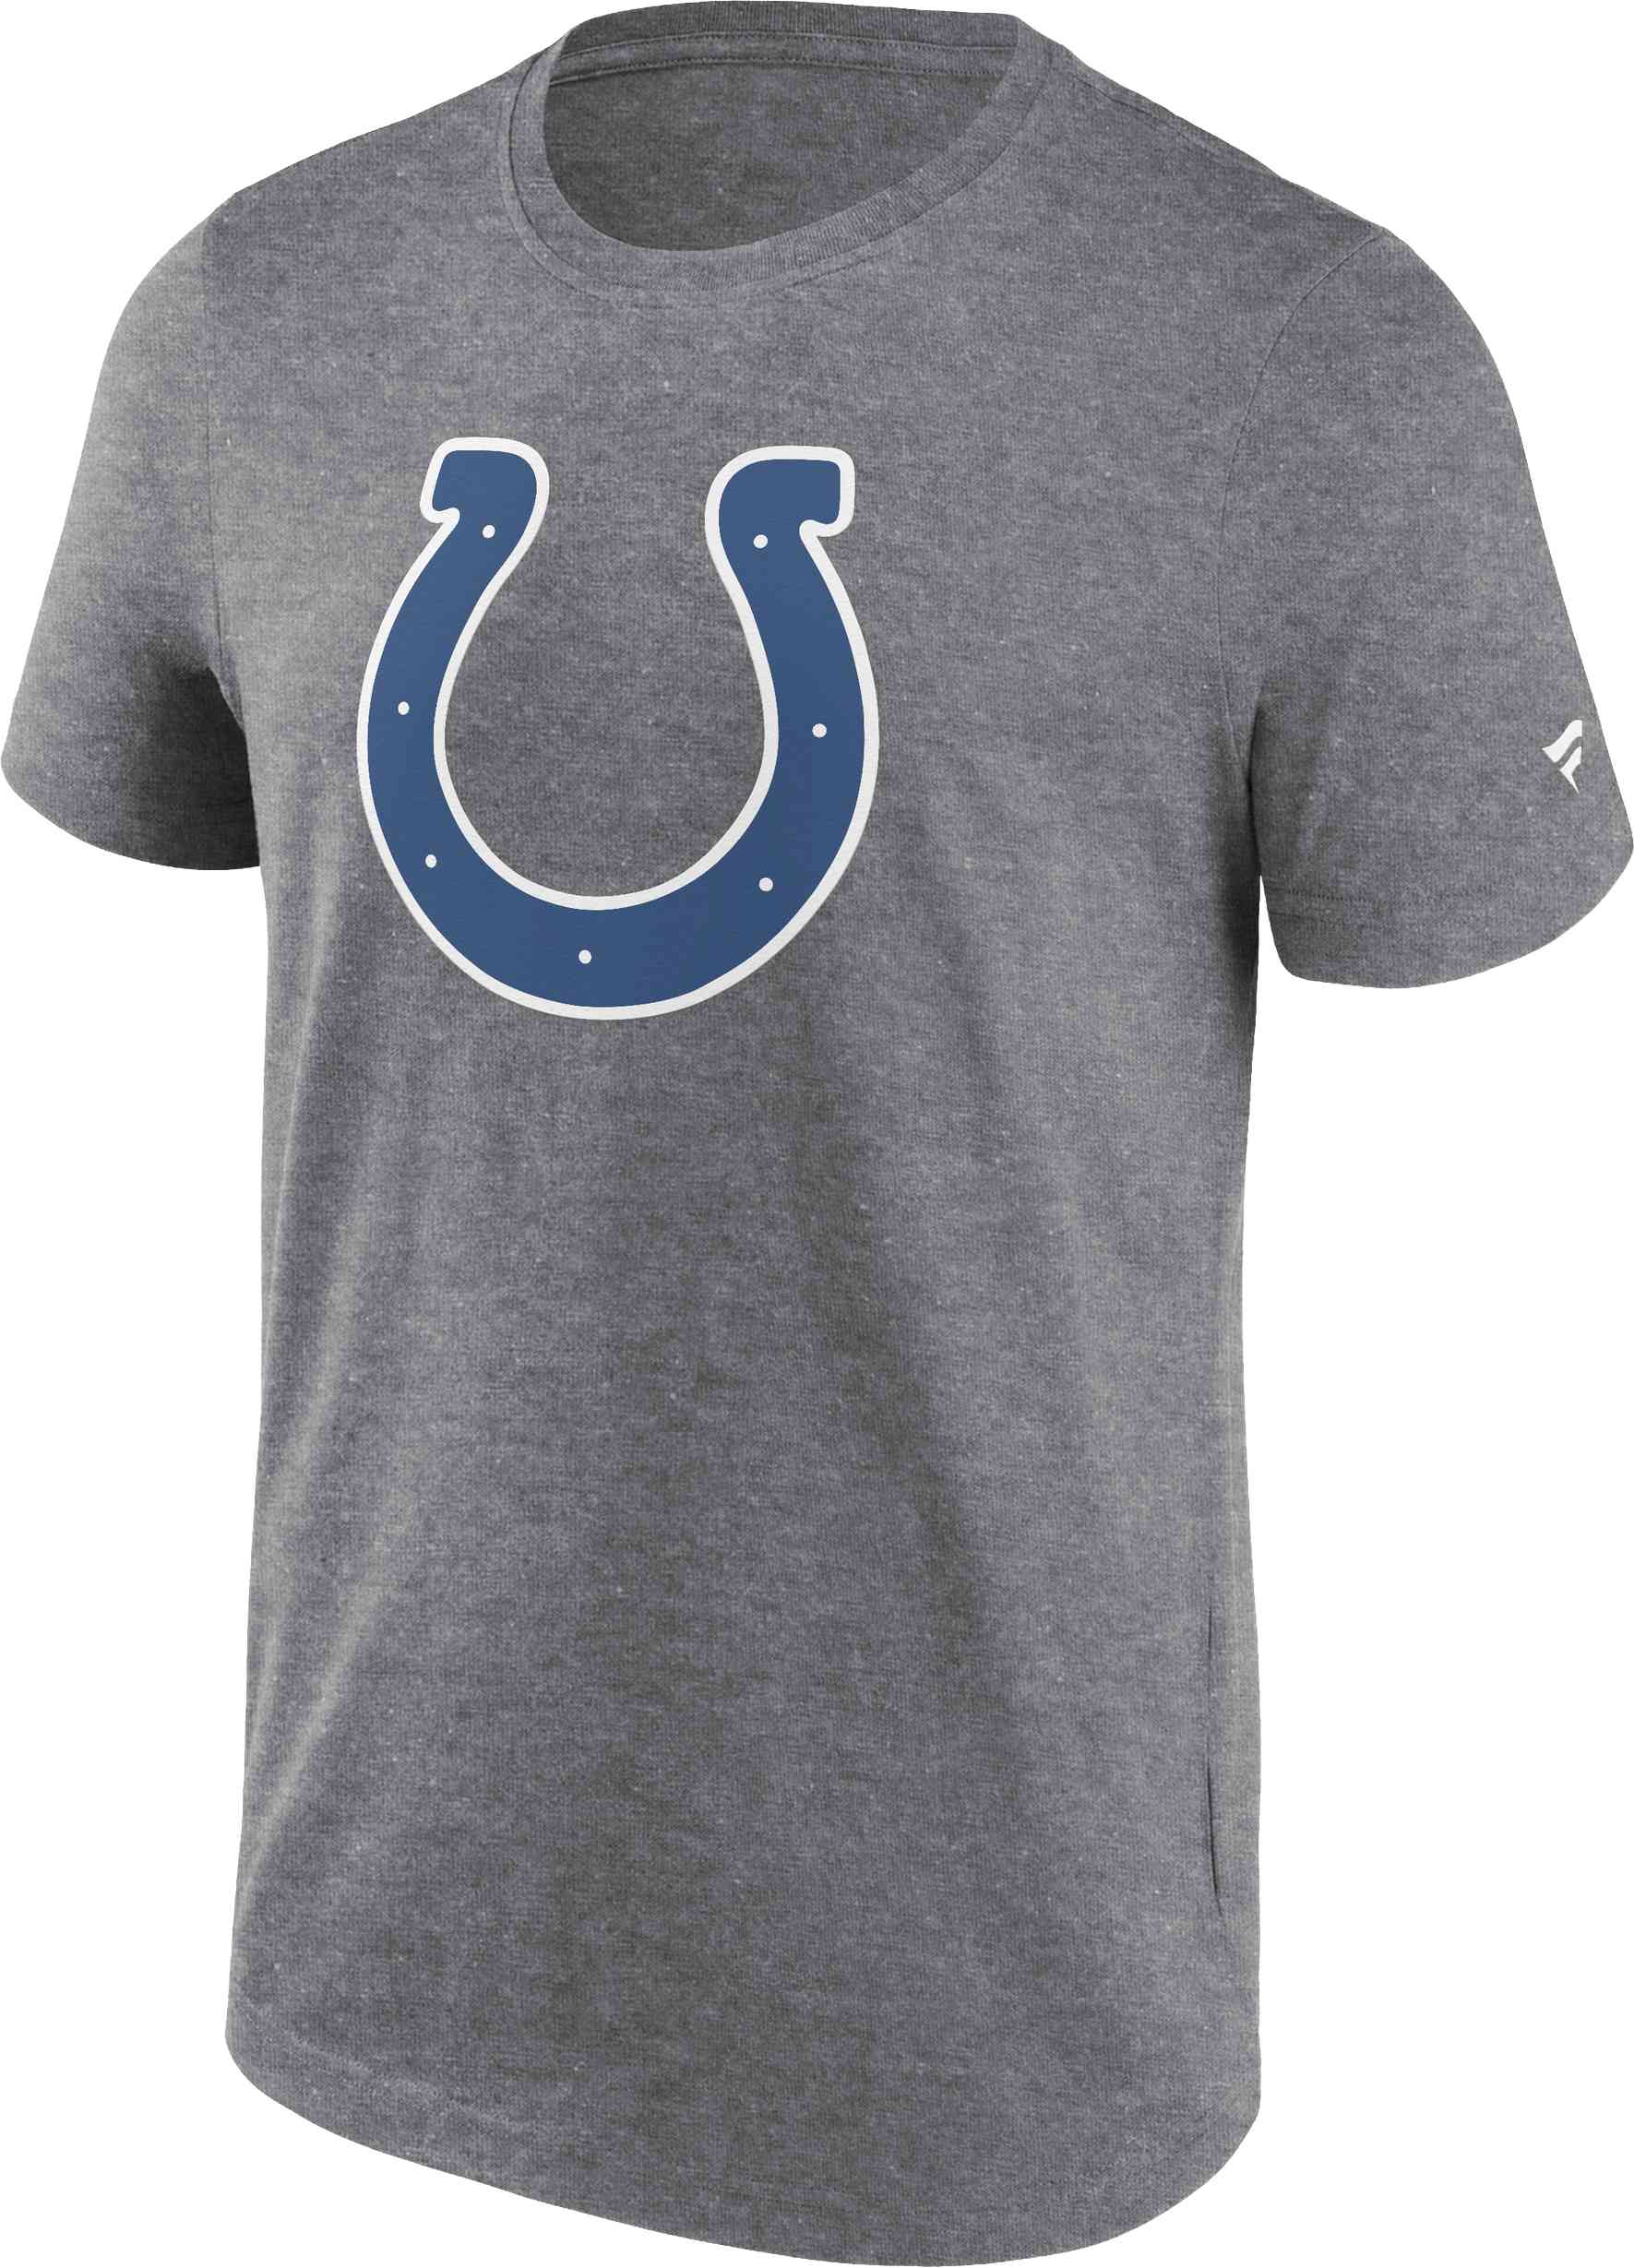 Fanatics - NFL Indianapolis Colts Primary Logo Graphic T-Shirt